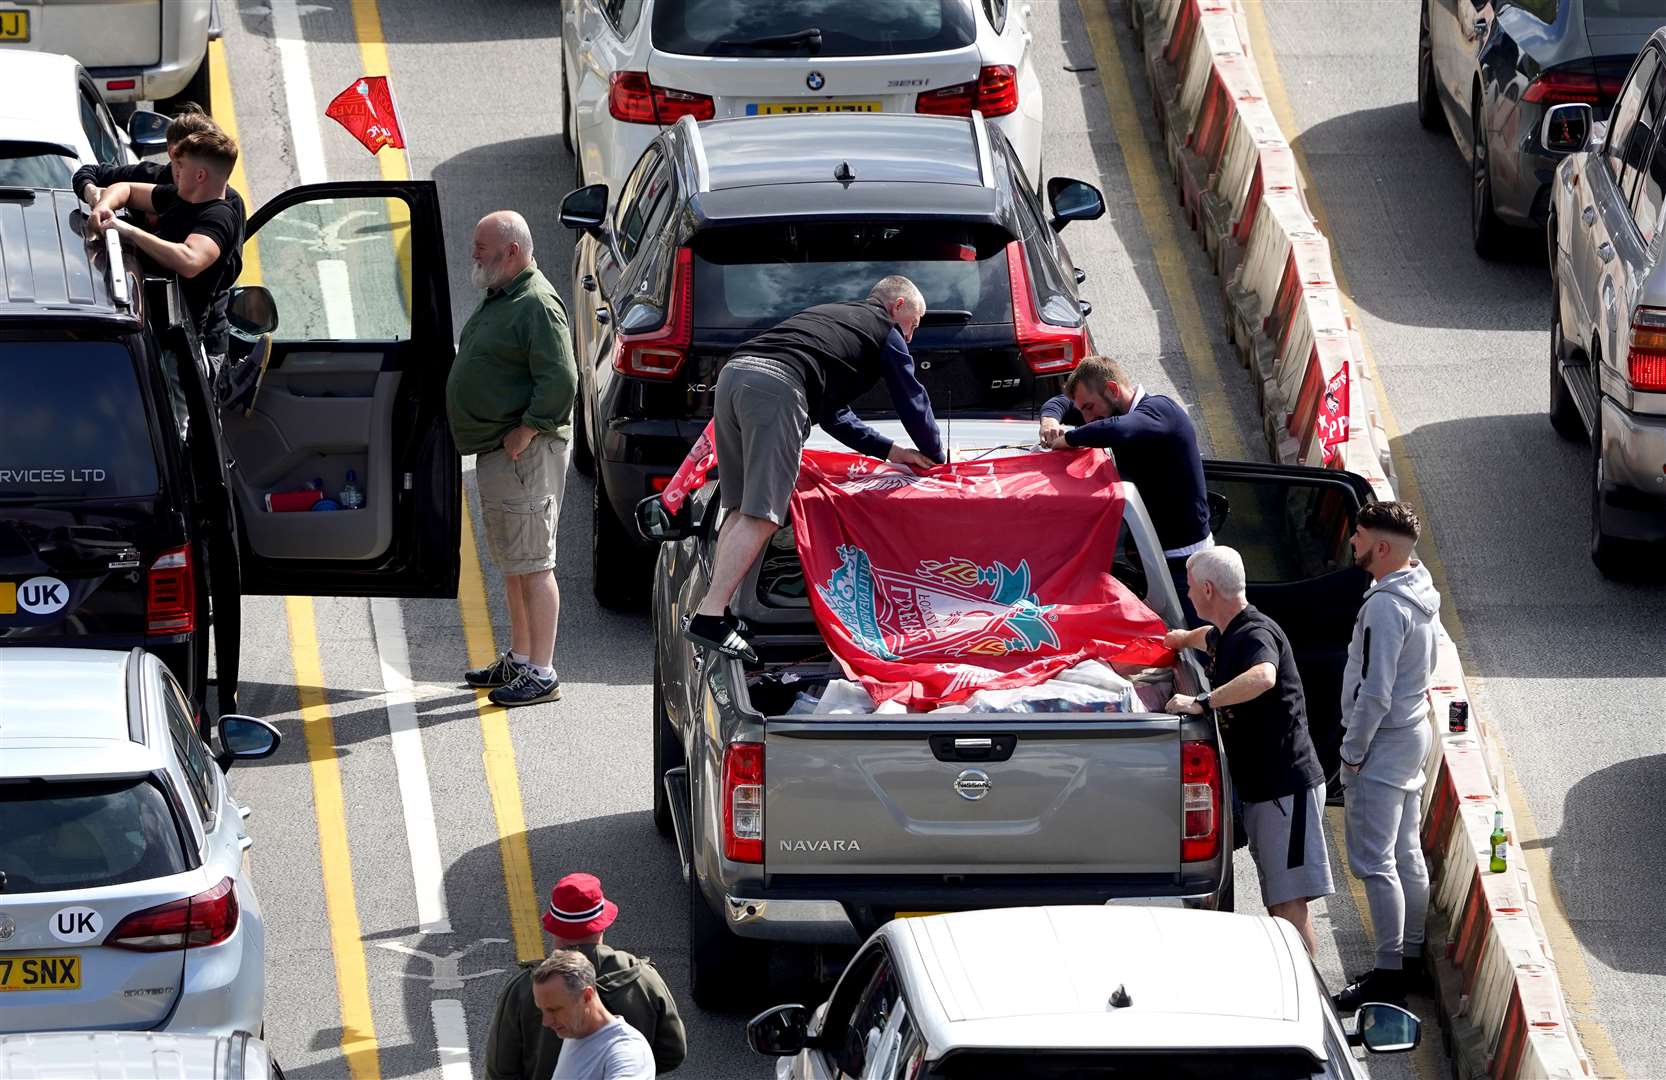 Liverpool supporters heading for the Champions League final in Paris wait amongst freight and holiday traffic queues at the Port of Dover in Kent (Gareth Fuller/PA)